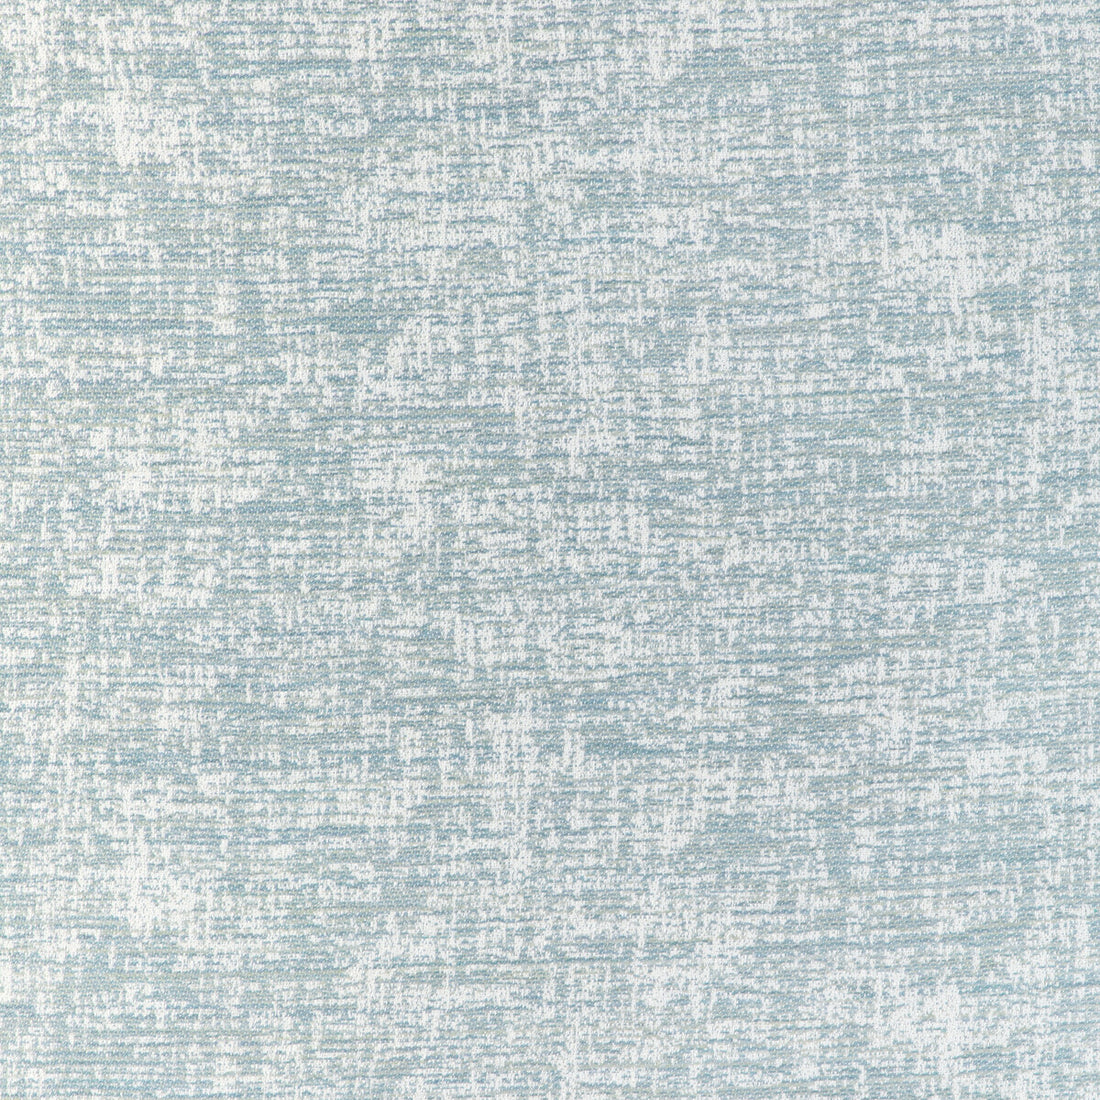 Seadrift fabric in sky color - pattern 36919.15.0 - by Kravet Couture in the Riviera collection